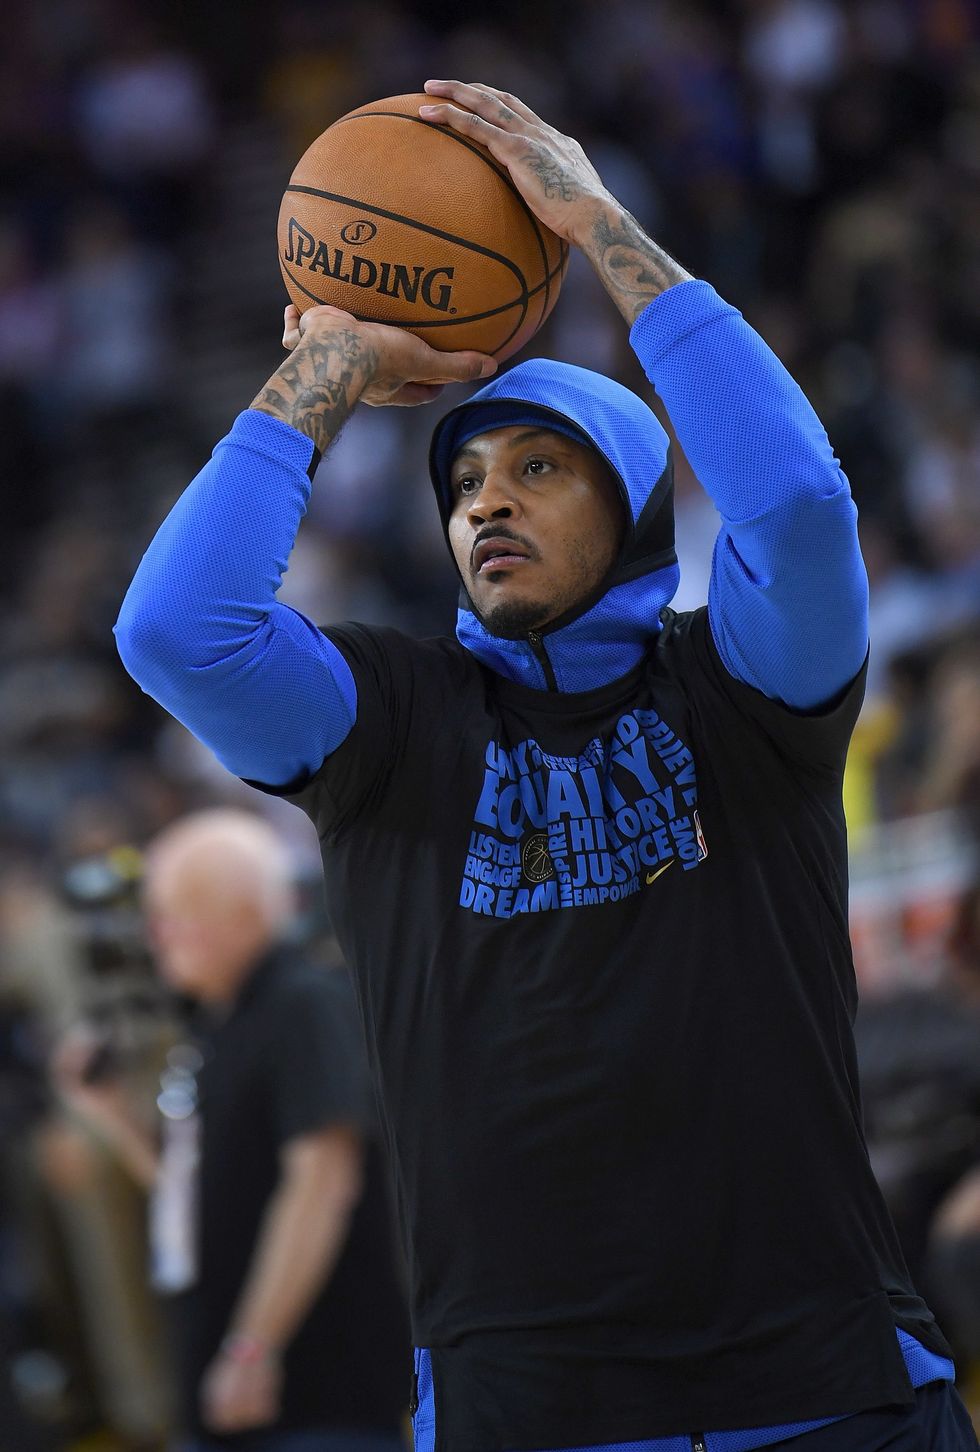 Paul Muth: Carmelo signing is a win-win for Rockets